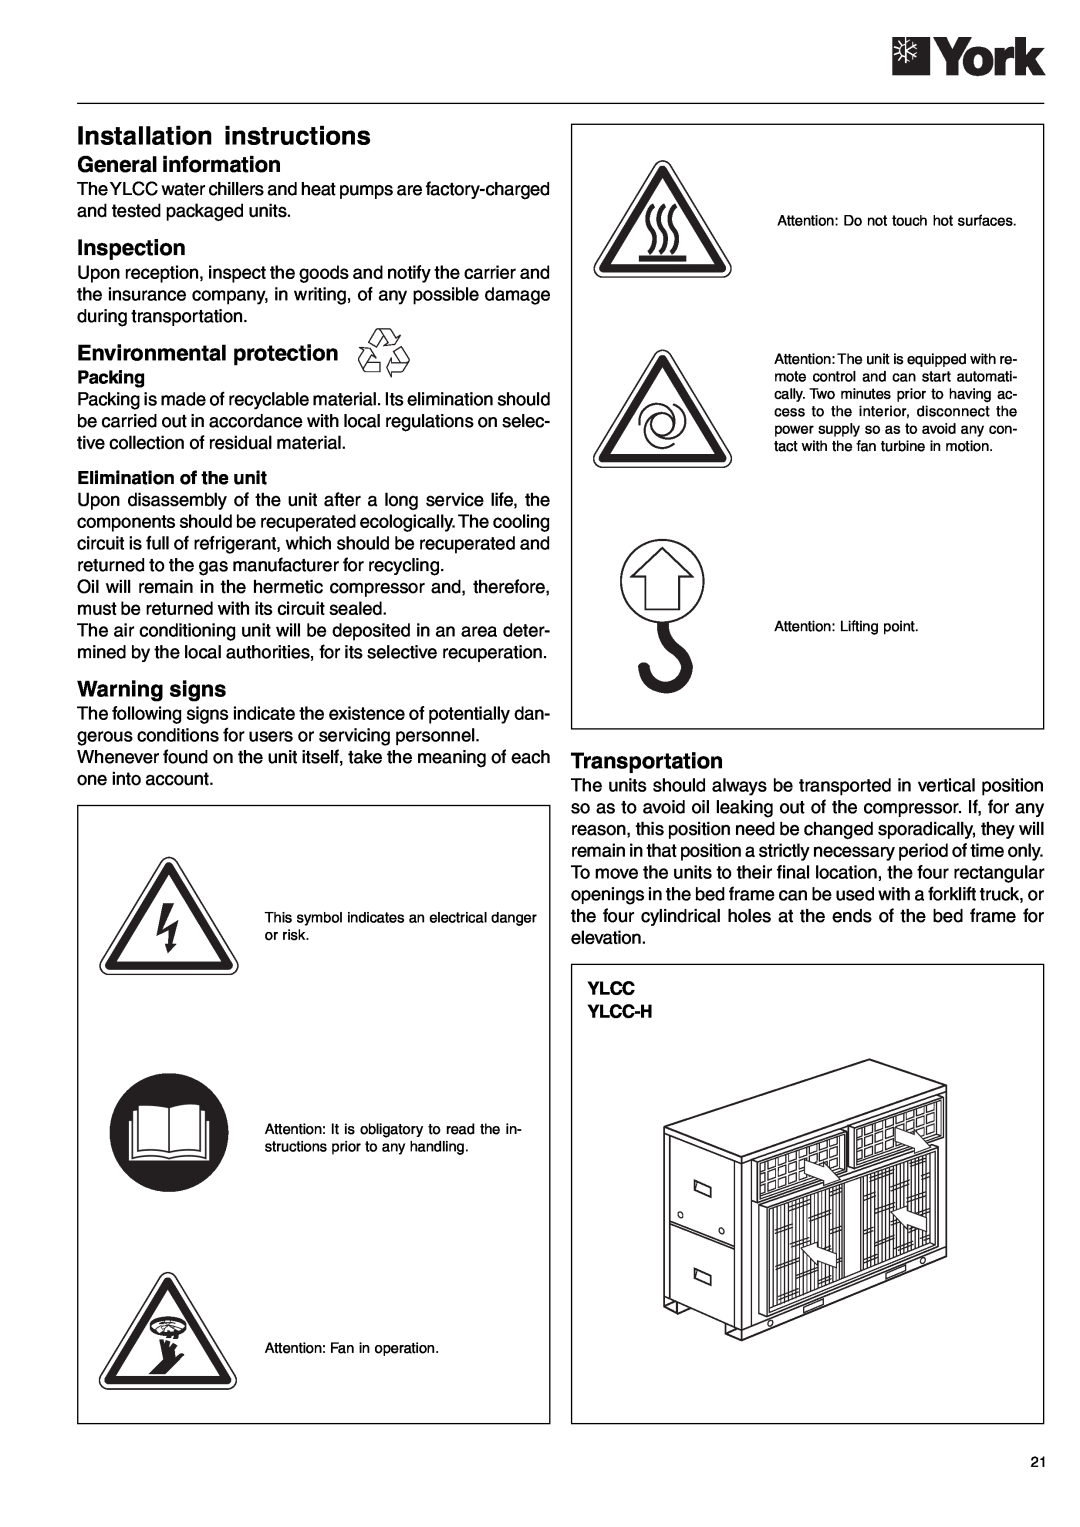 York YLCC-h Installation instructions, General information, Inspection, Environmental protection, Warning signs, Packing 